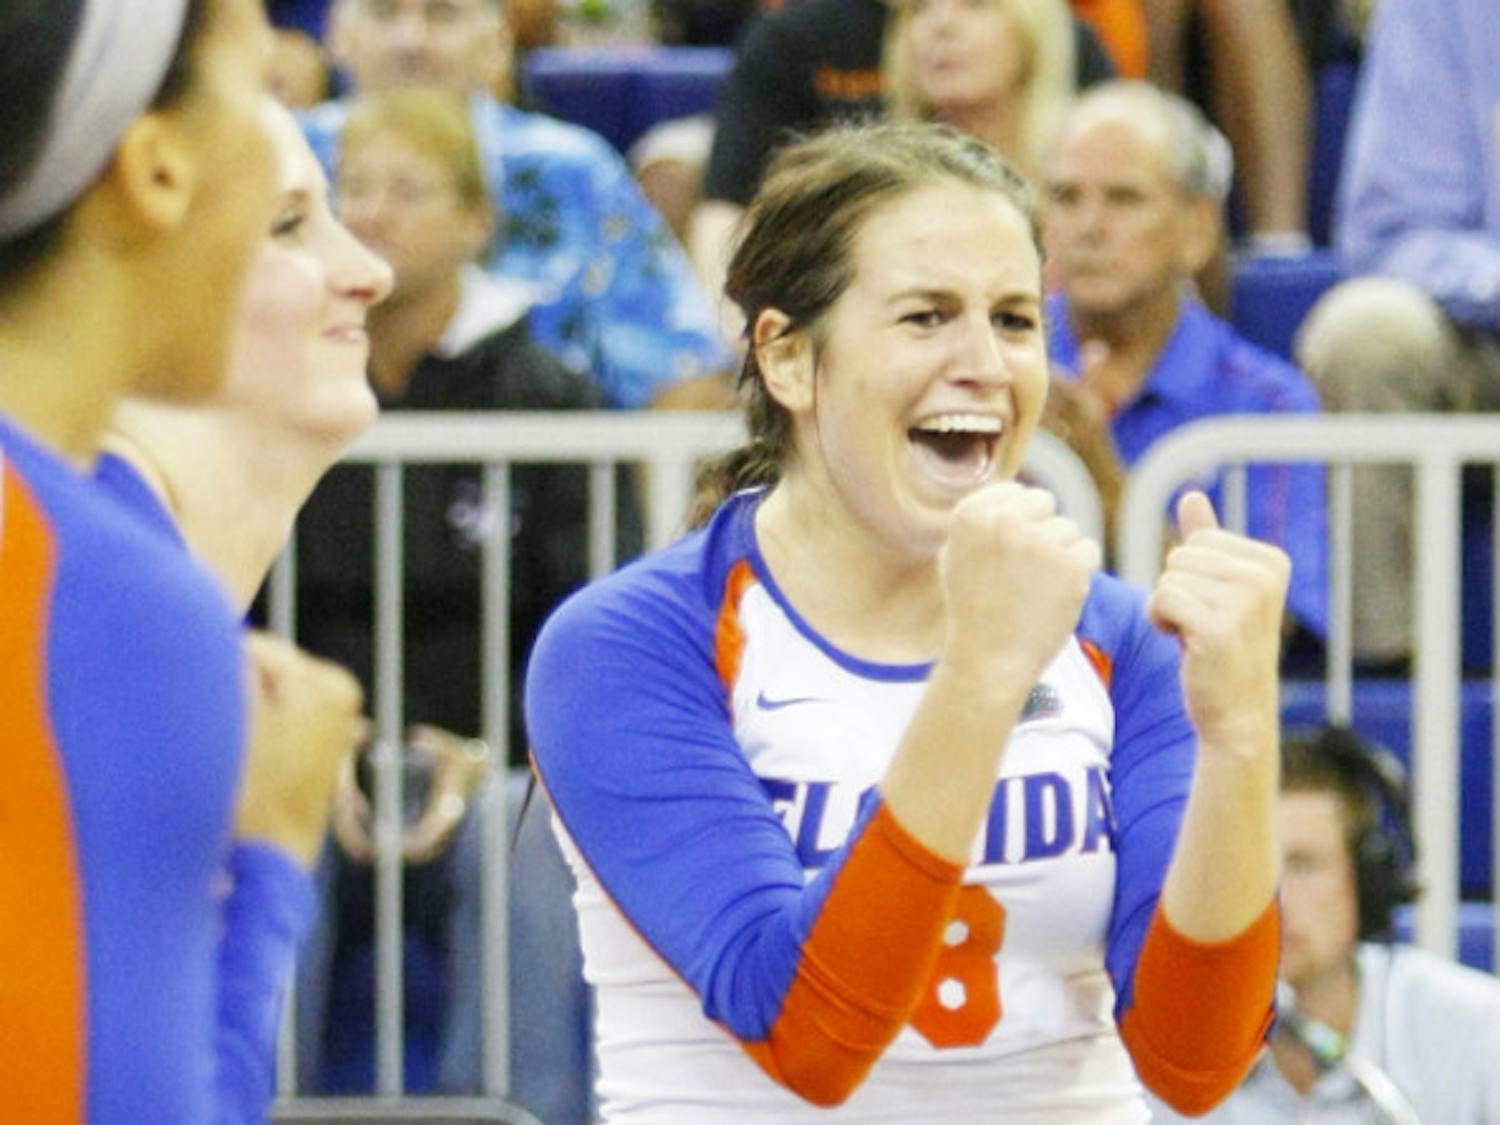 Junior setter Taylor Brauneis (8) celebrates with her teammates during Florida’s 3-0 win against Arkansas on Oct. 5 at the Stephen C. O’Connell Center.